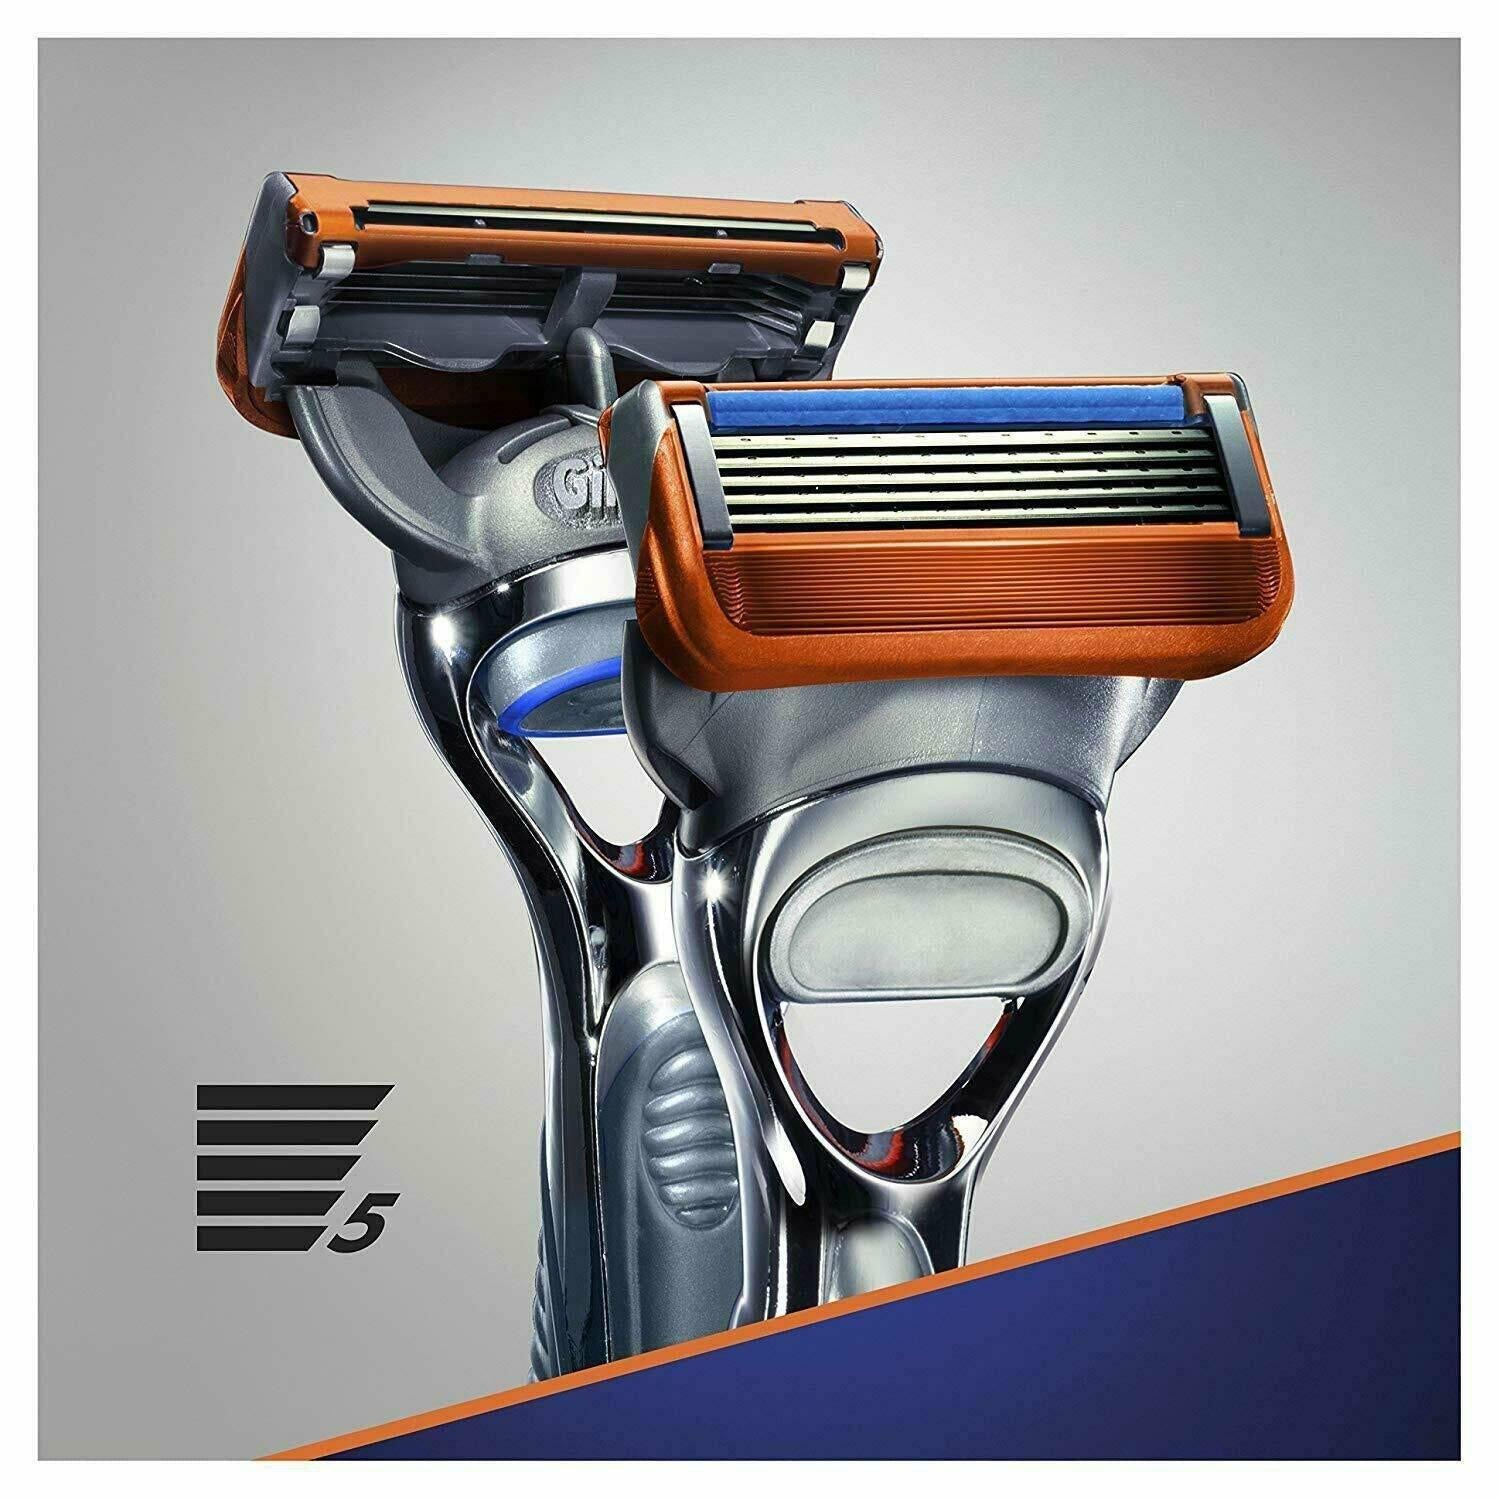 Gillette Fusion5 Razor Starter Pack with 4 Blades - Five-Blade Shave Technology - Healthxpress.ie